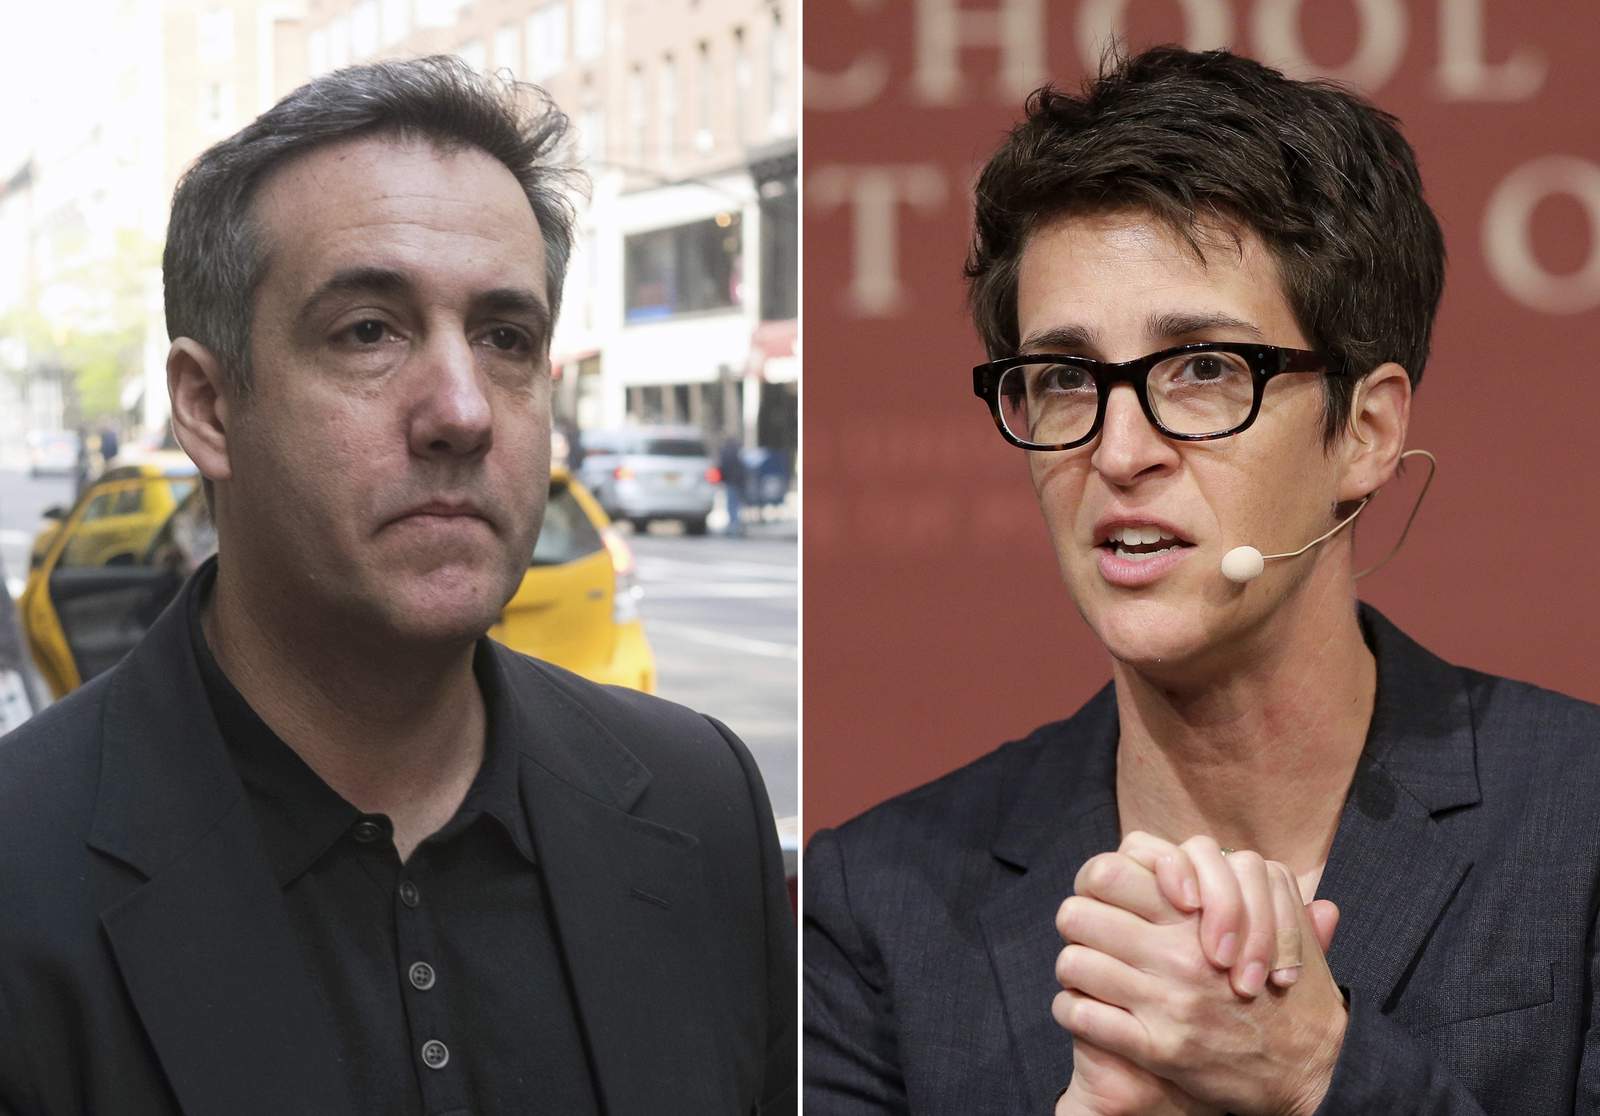 Maddow beneficiary of scramble for attention by authors